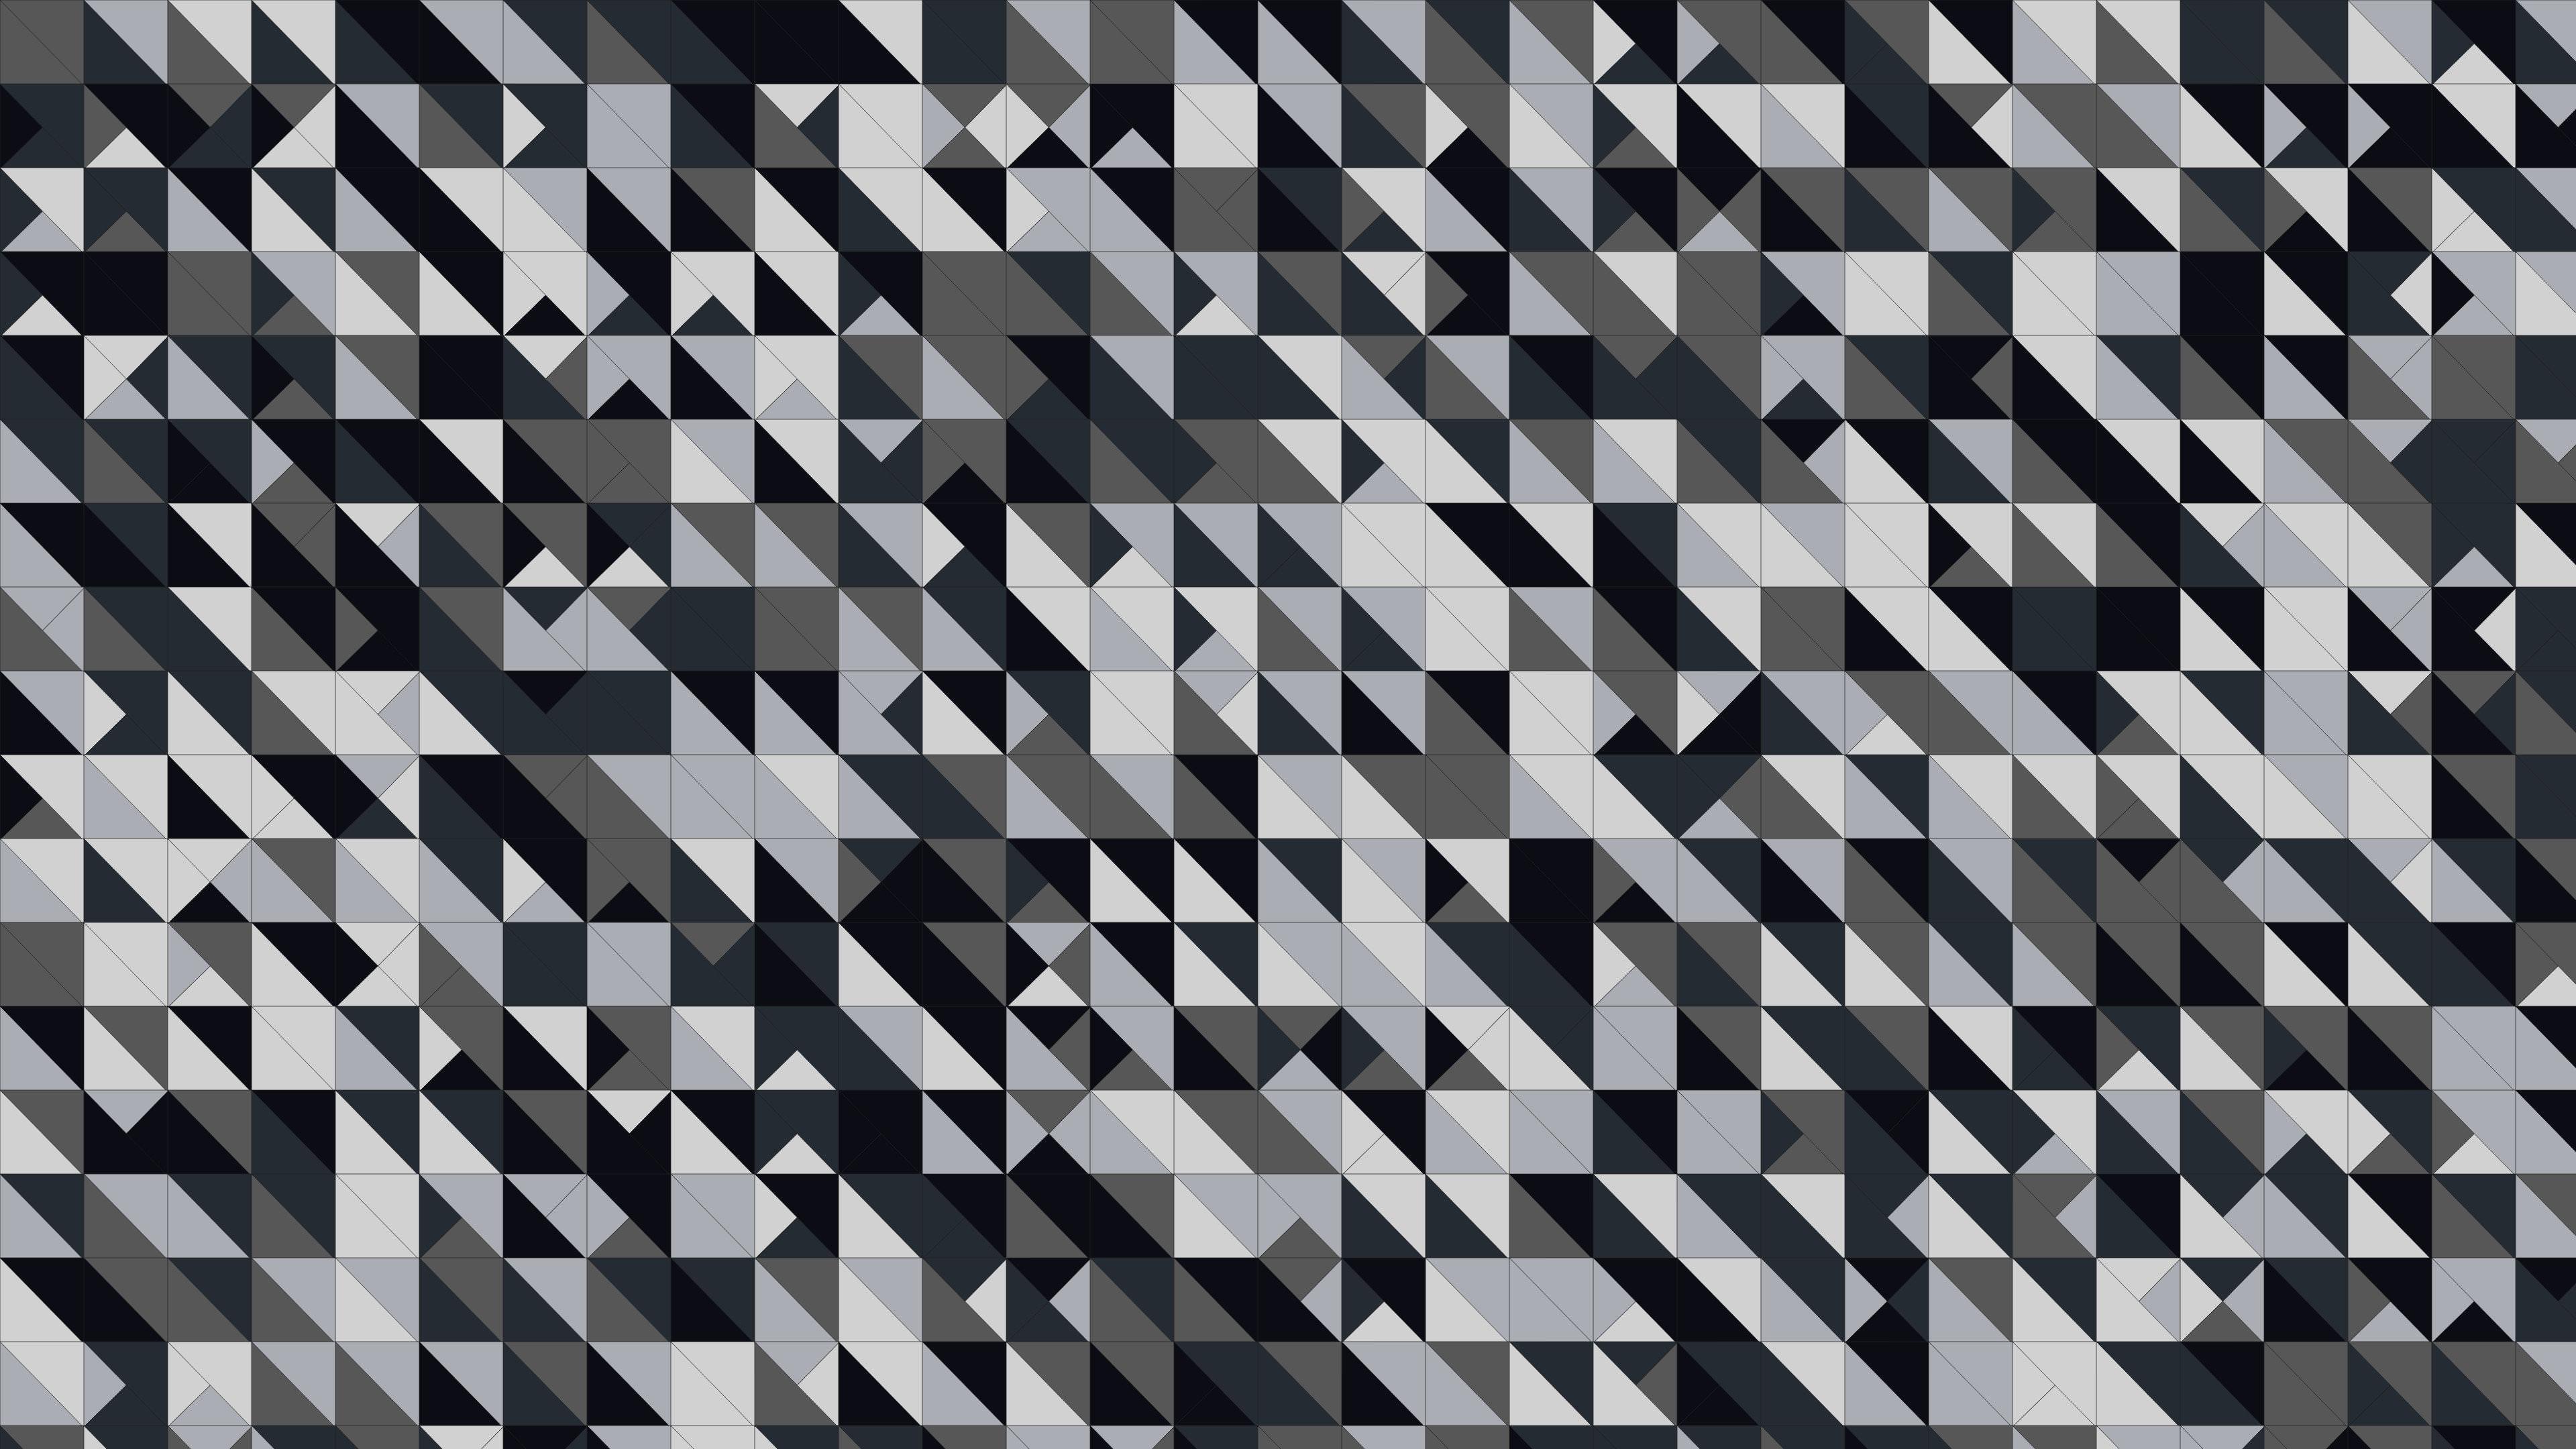 Black and White abstract wallpaper 3840x2160 Ultra HD 4k desktop background